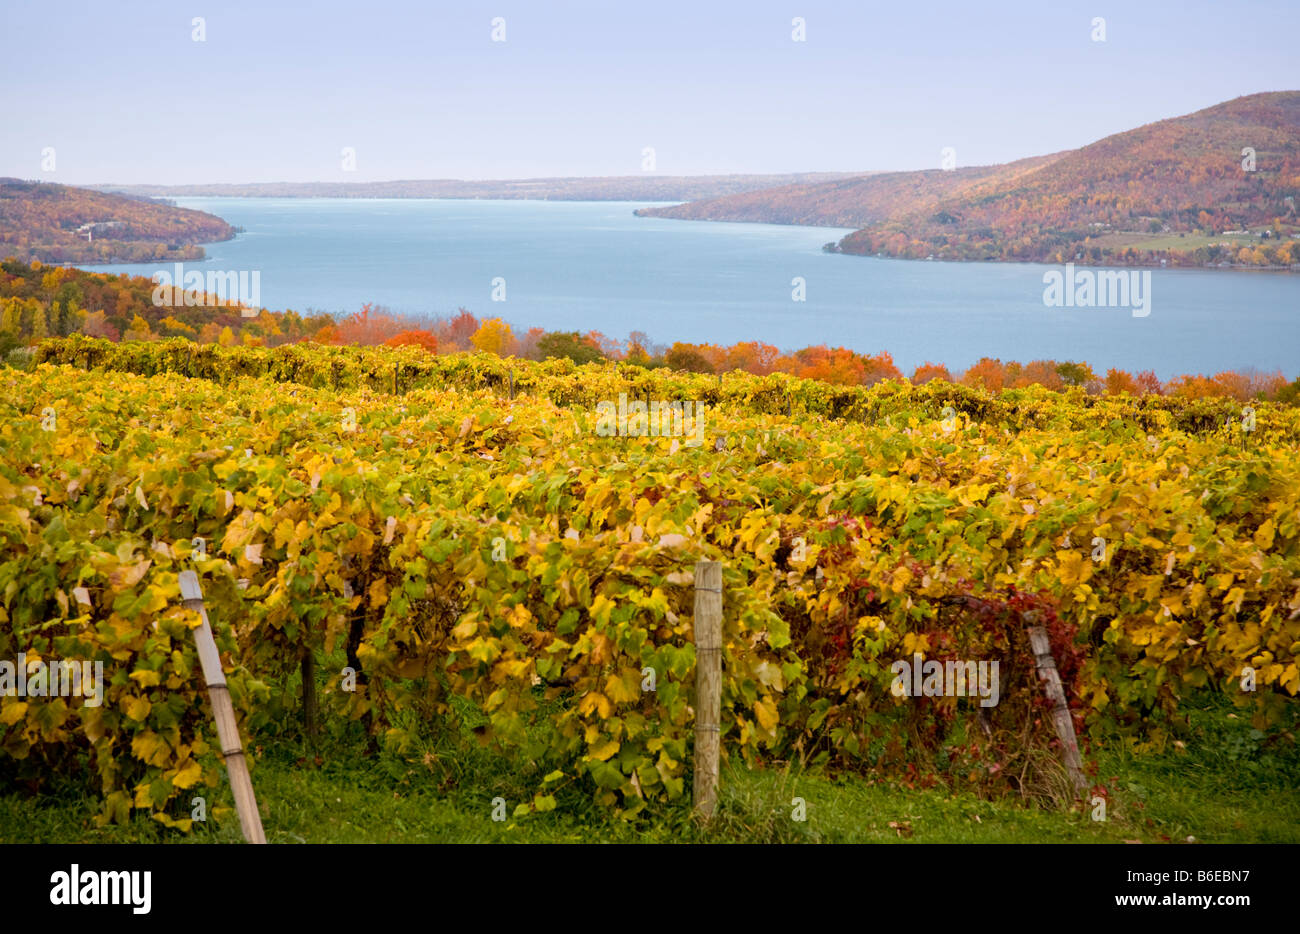 Fall vineyards with Canandaigua Lake in the Finger Lakes region of New York State in the background Stock Photo